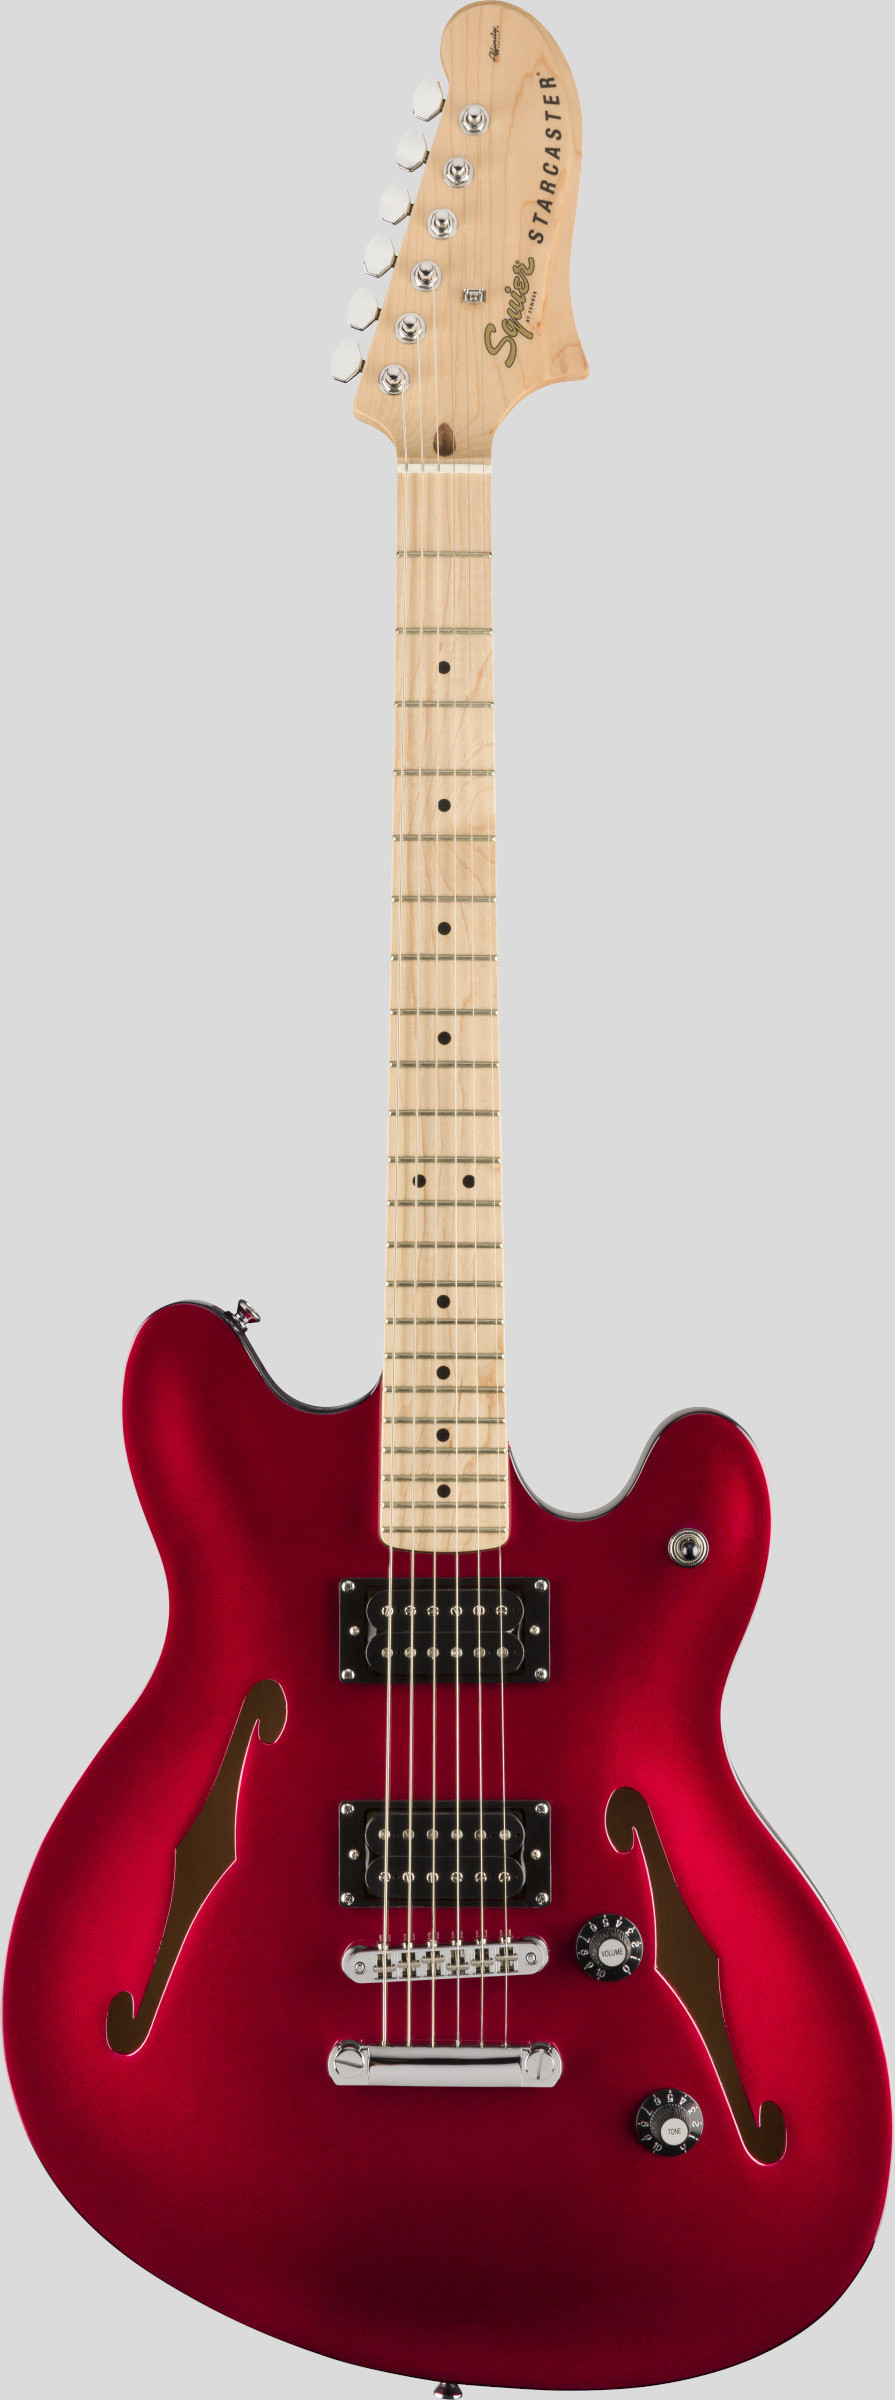 Squier by Fender Affinity Starcaster Candy Apple Red 1